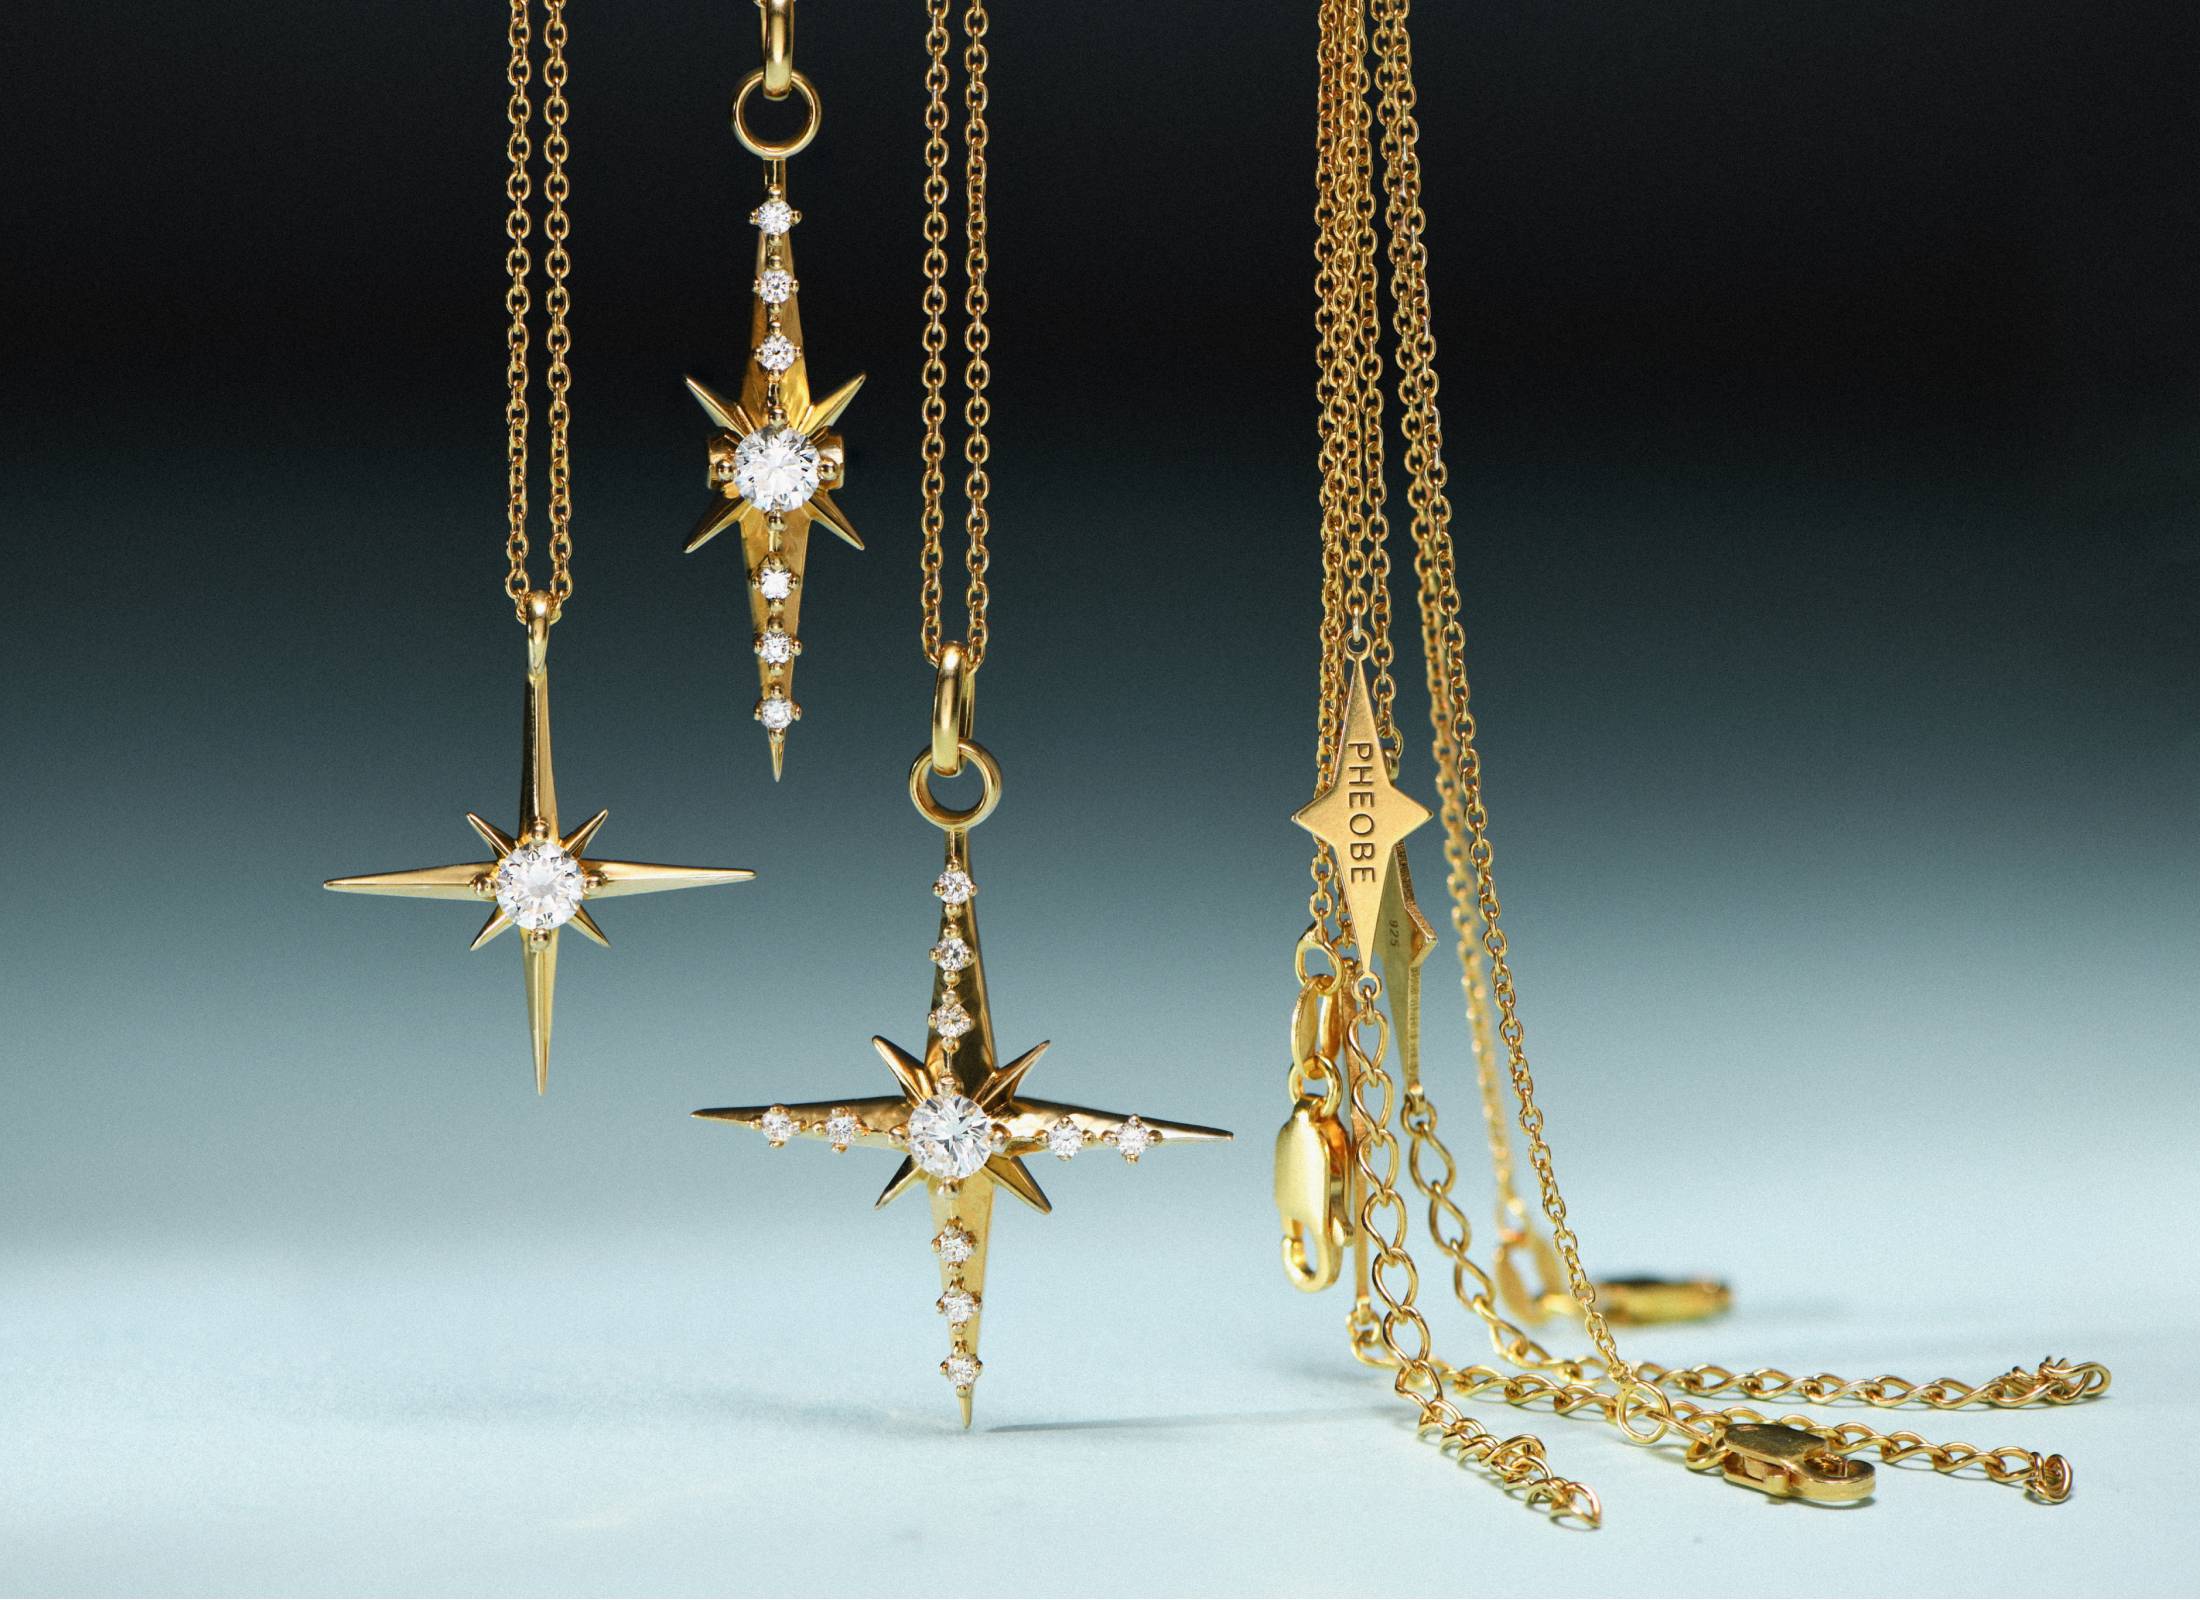 NORTHERN STAR JEWELRY & NECKLACES